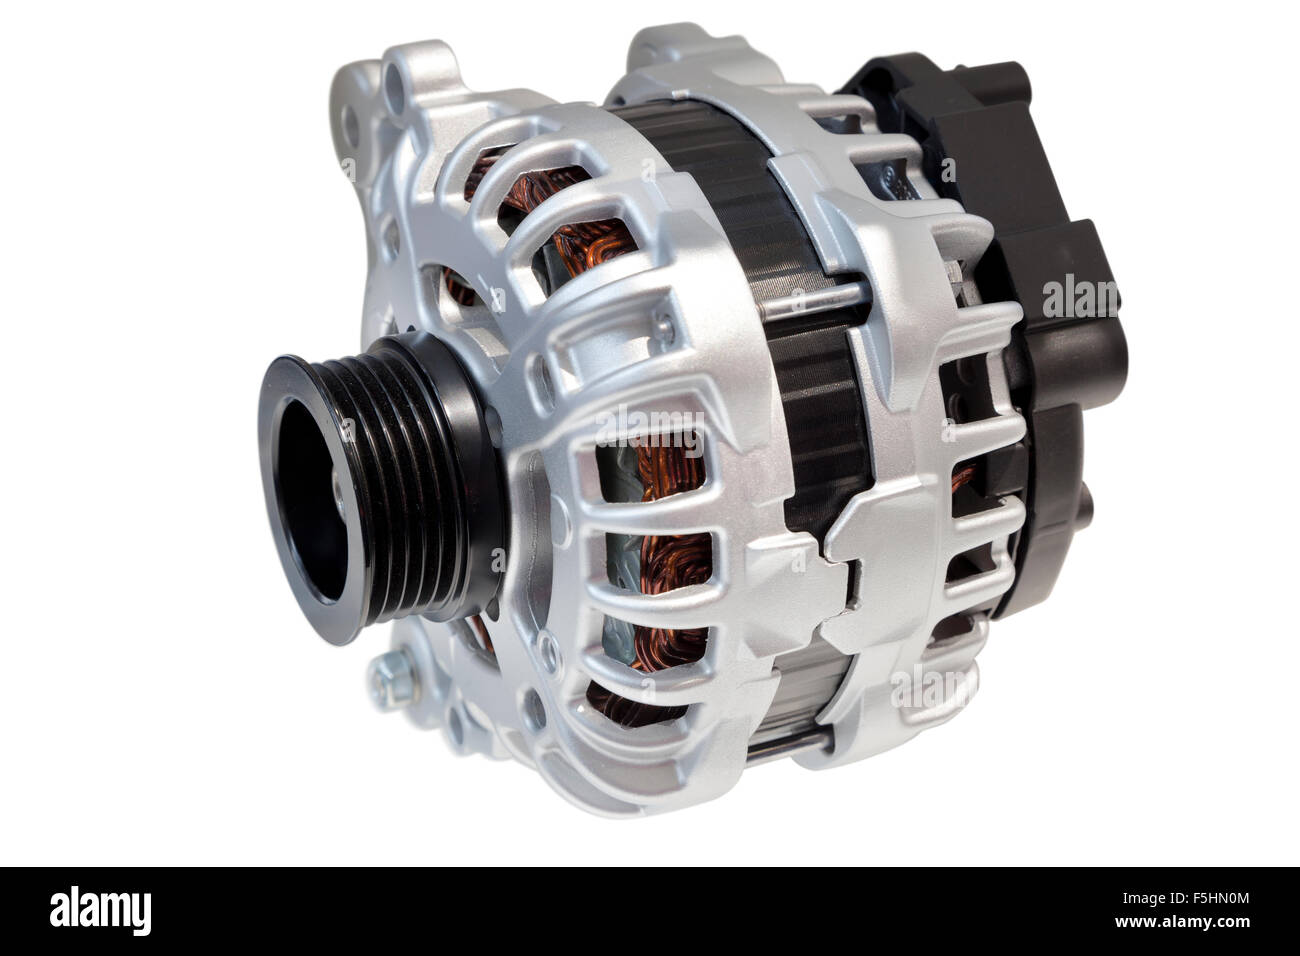 Alternator. Image of car alternator isolated on white. Clipping path included. Stock Photo